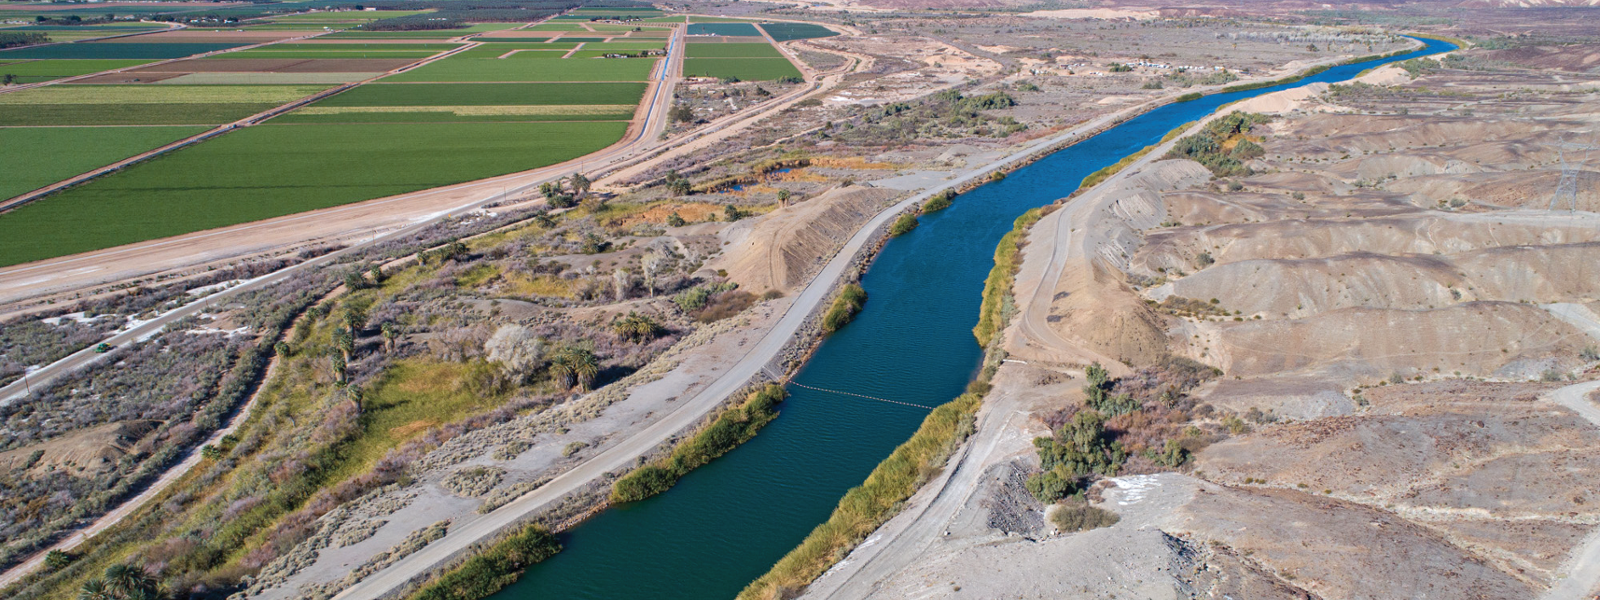 Commentary: Holding firm on Colorado River water is right move